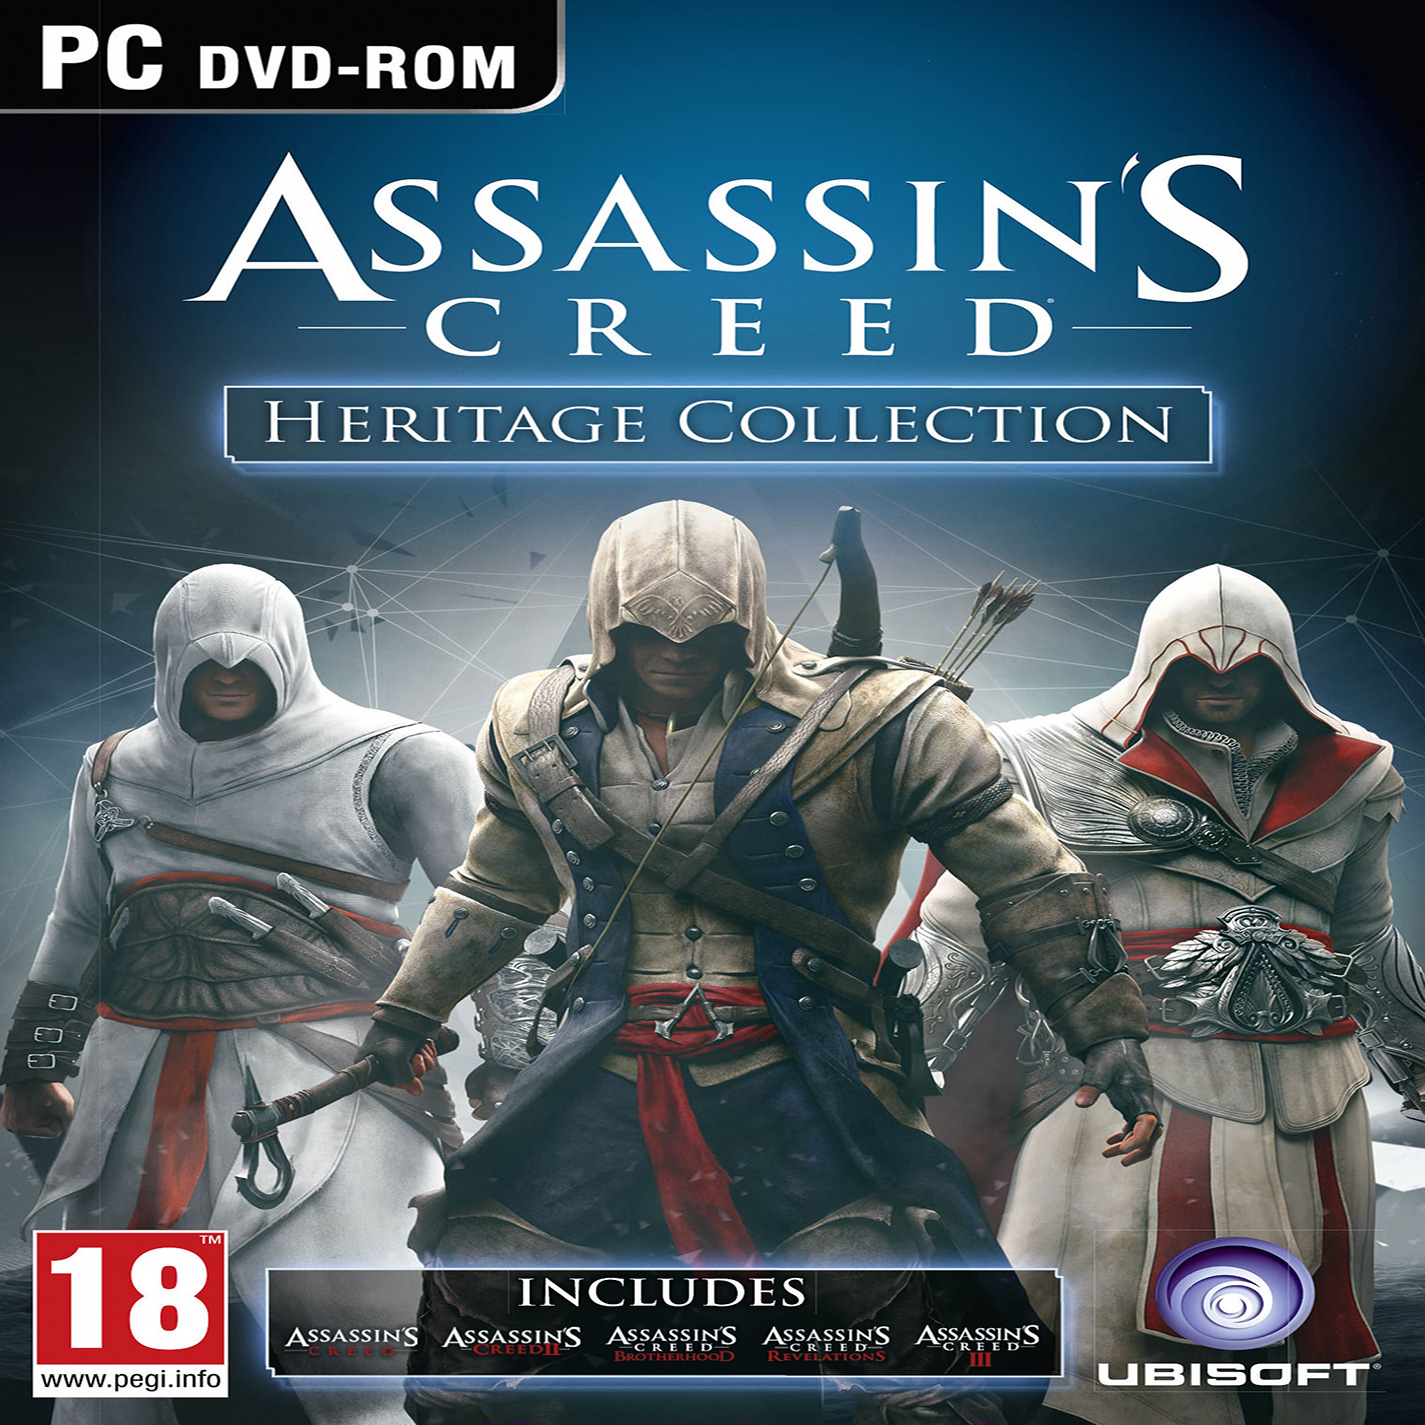 Assassins Creed: Heritage Collection - predn CD obal